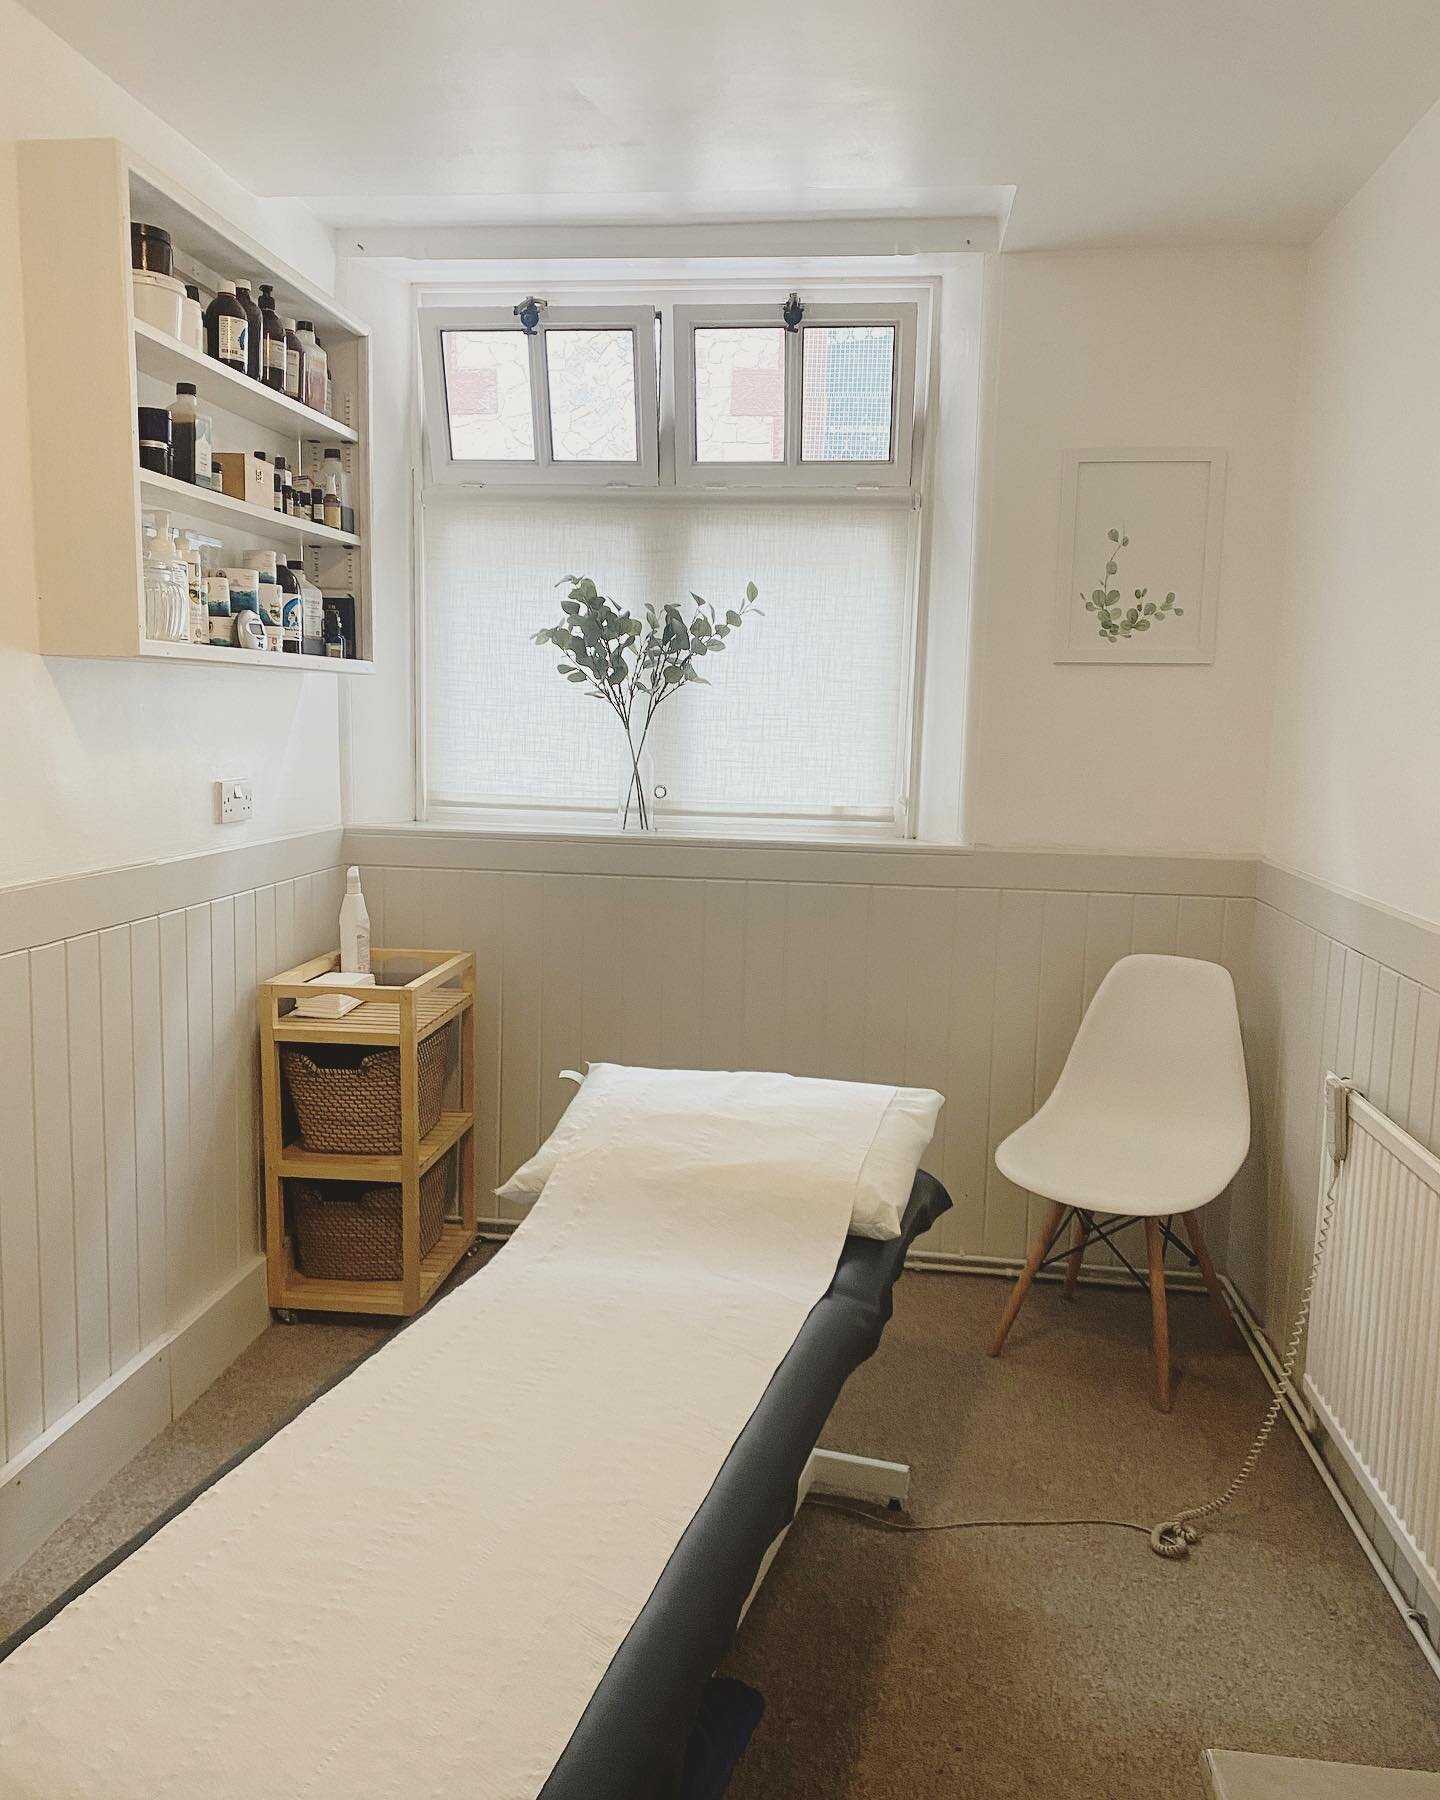 One of the lovely treatment rooms at @estuaryclinic ✨

Find me here on Mondays and Tuesdays✨